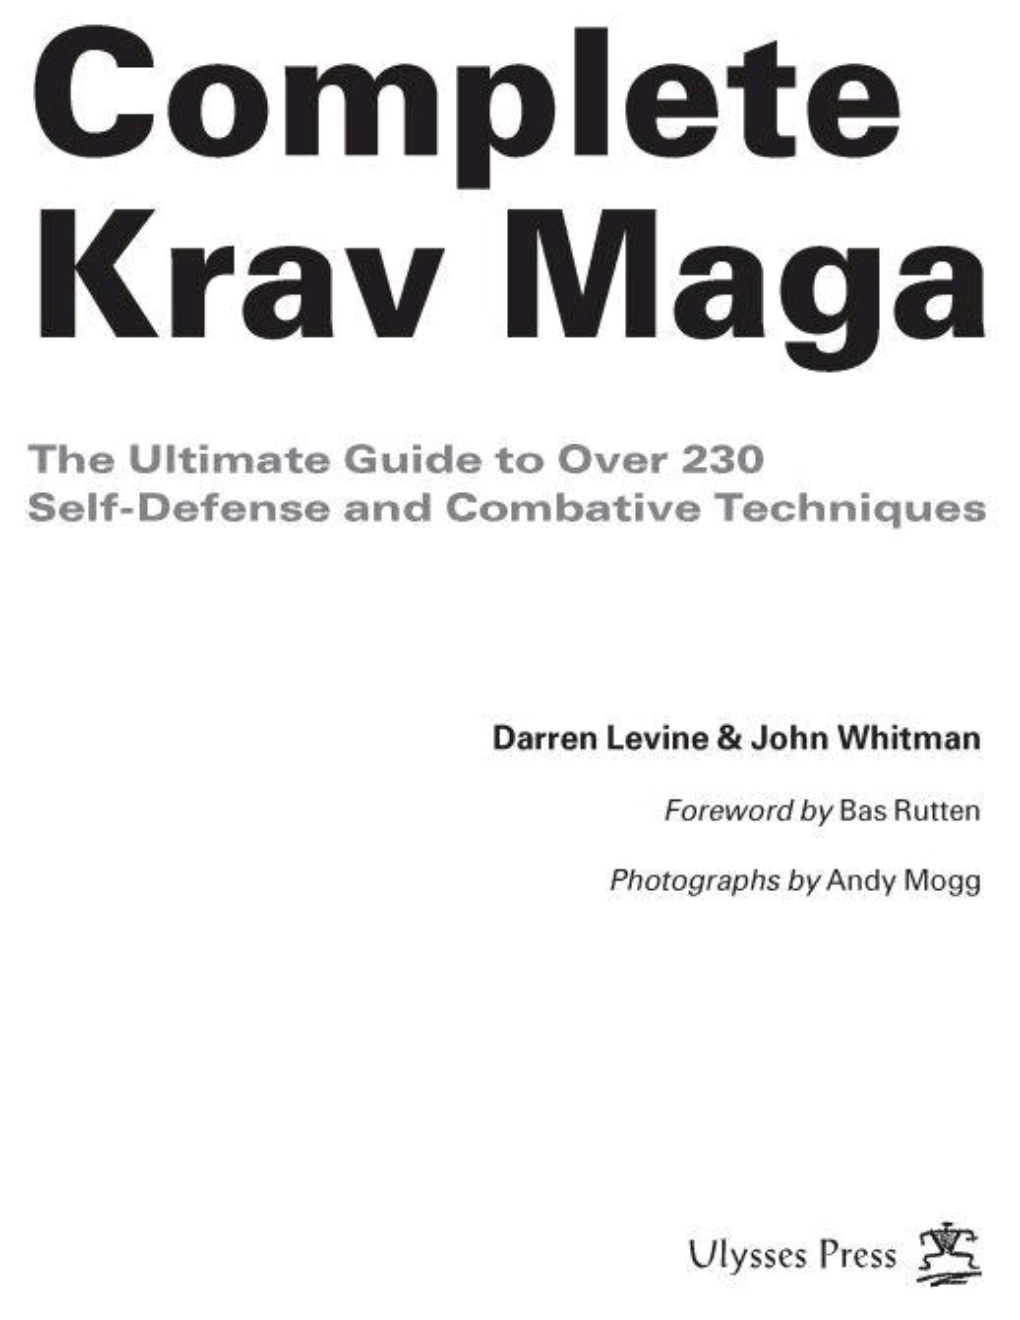 Complete Krav Maga: the Ultimate Guide to Over 200 Self-Defense